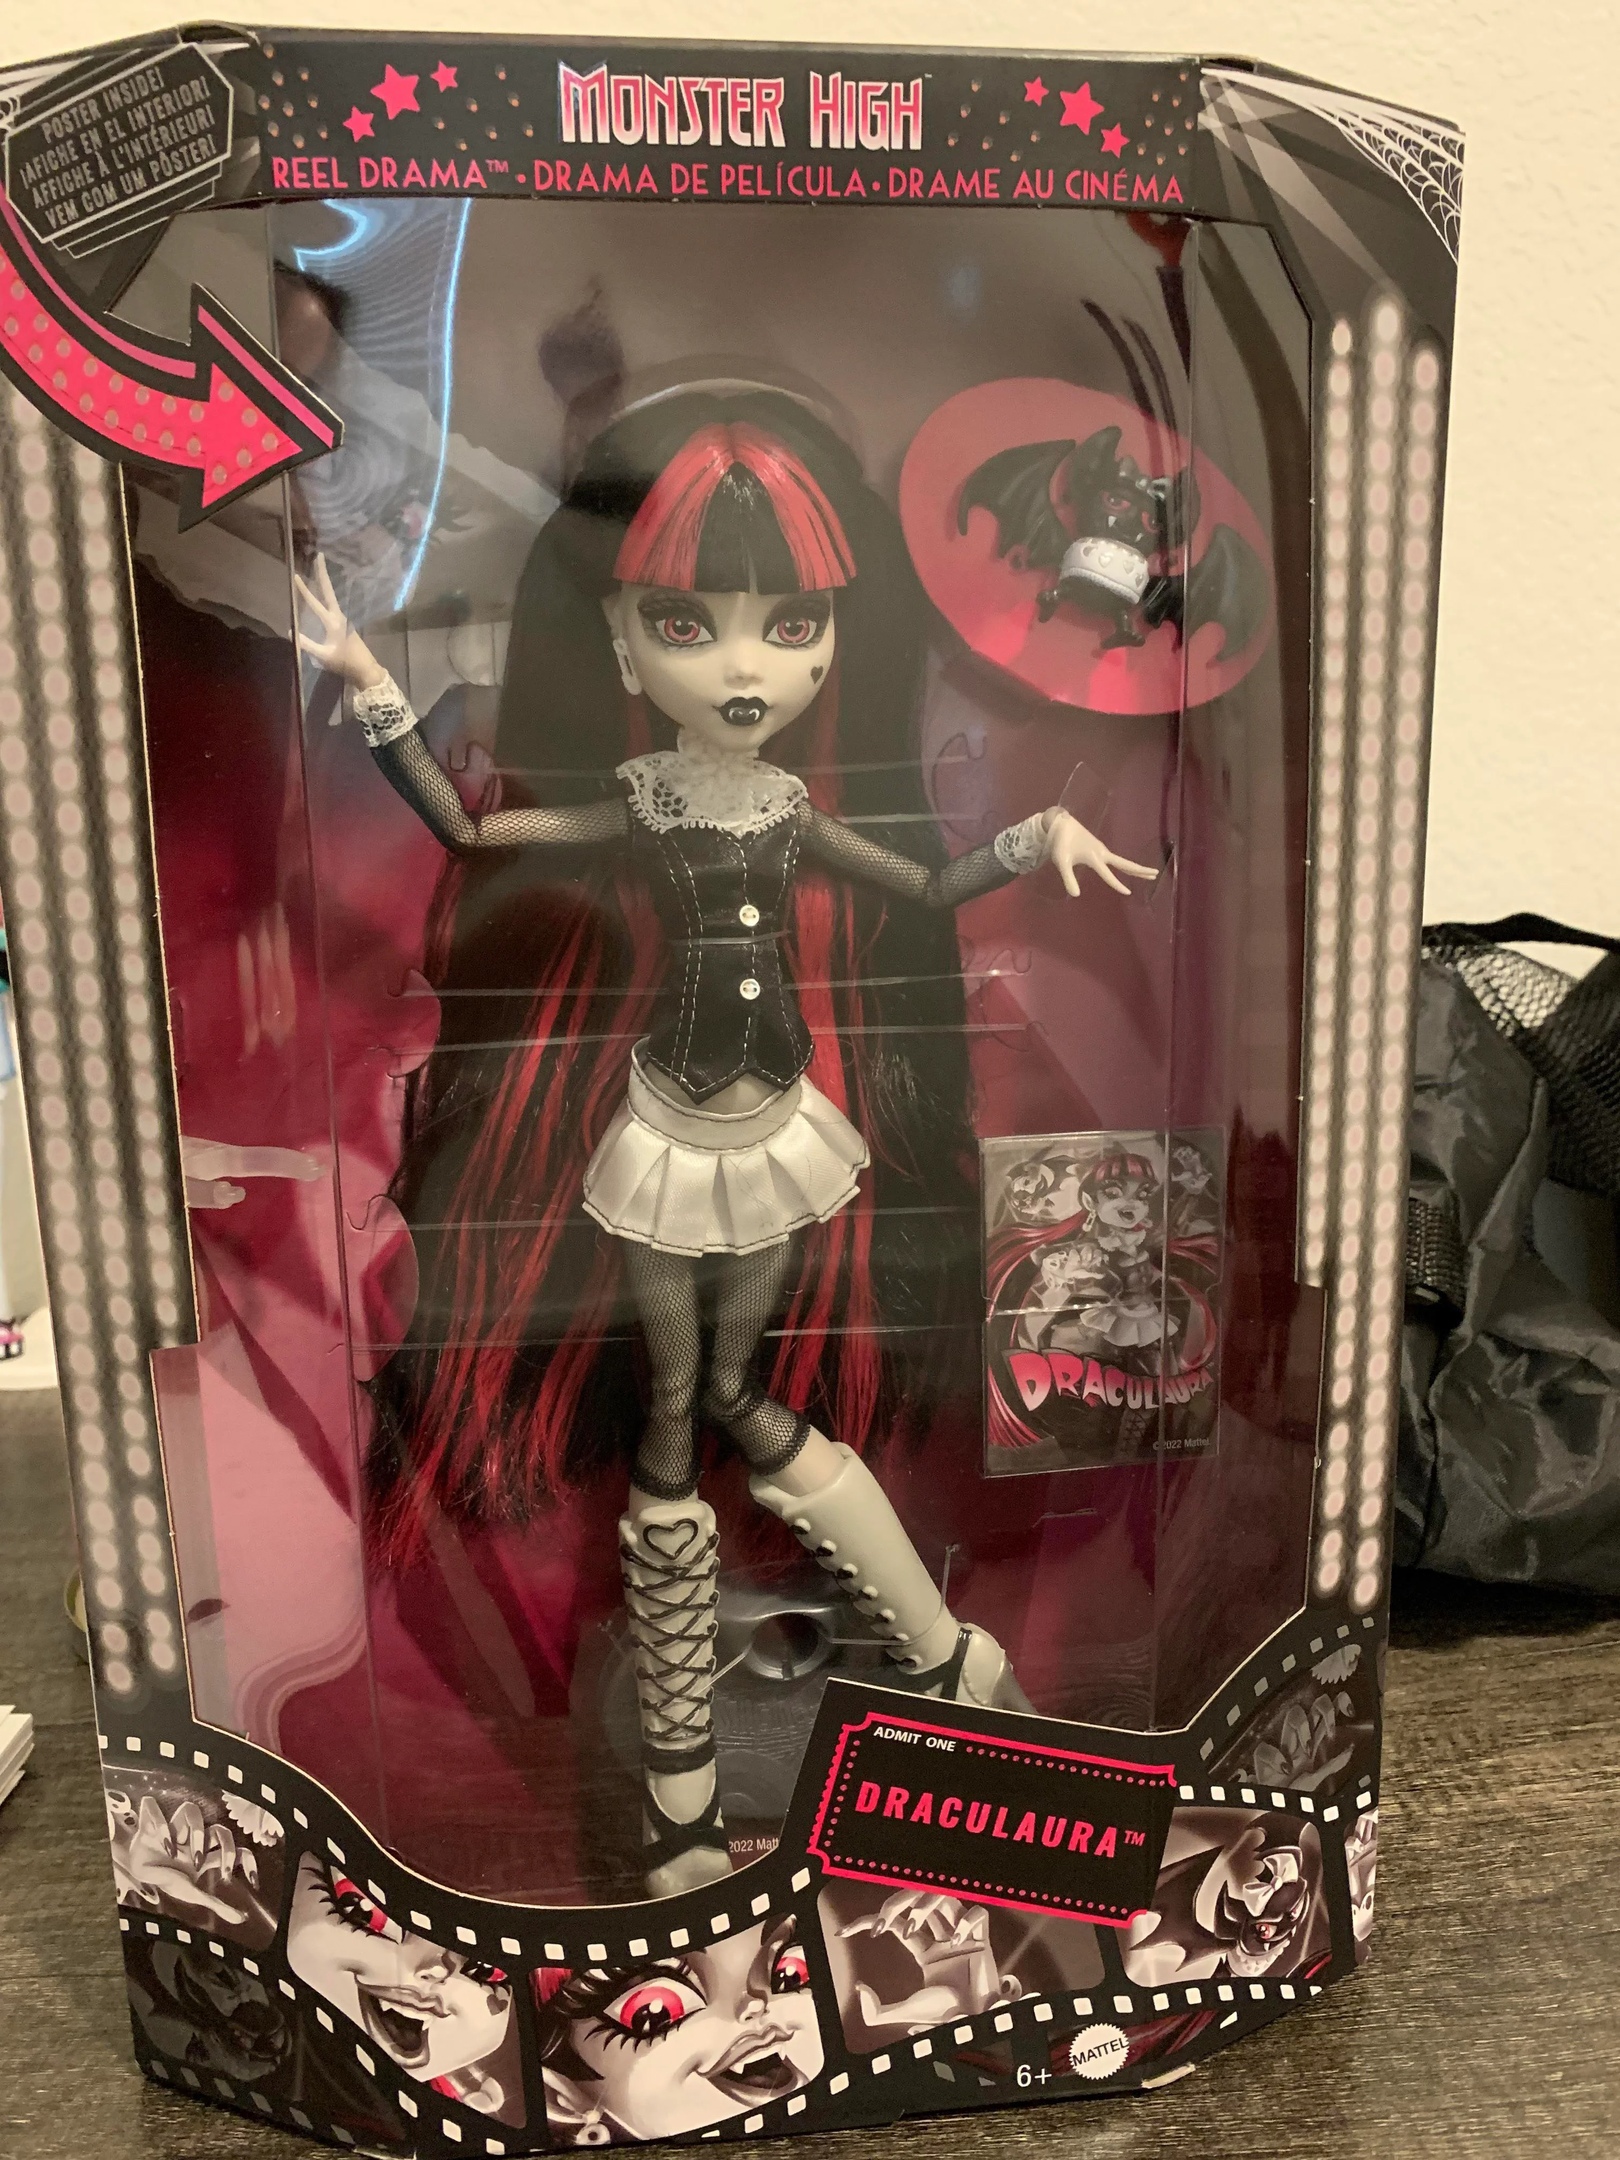 Monster High Draculaura Reel Drama Doll Pet Bat Poster Stand New 2022  Exclusive - Dolls & Accessories